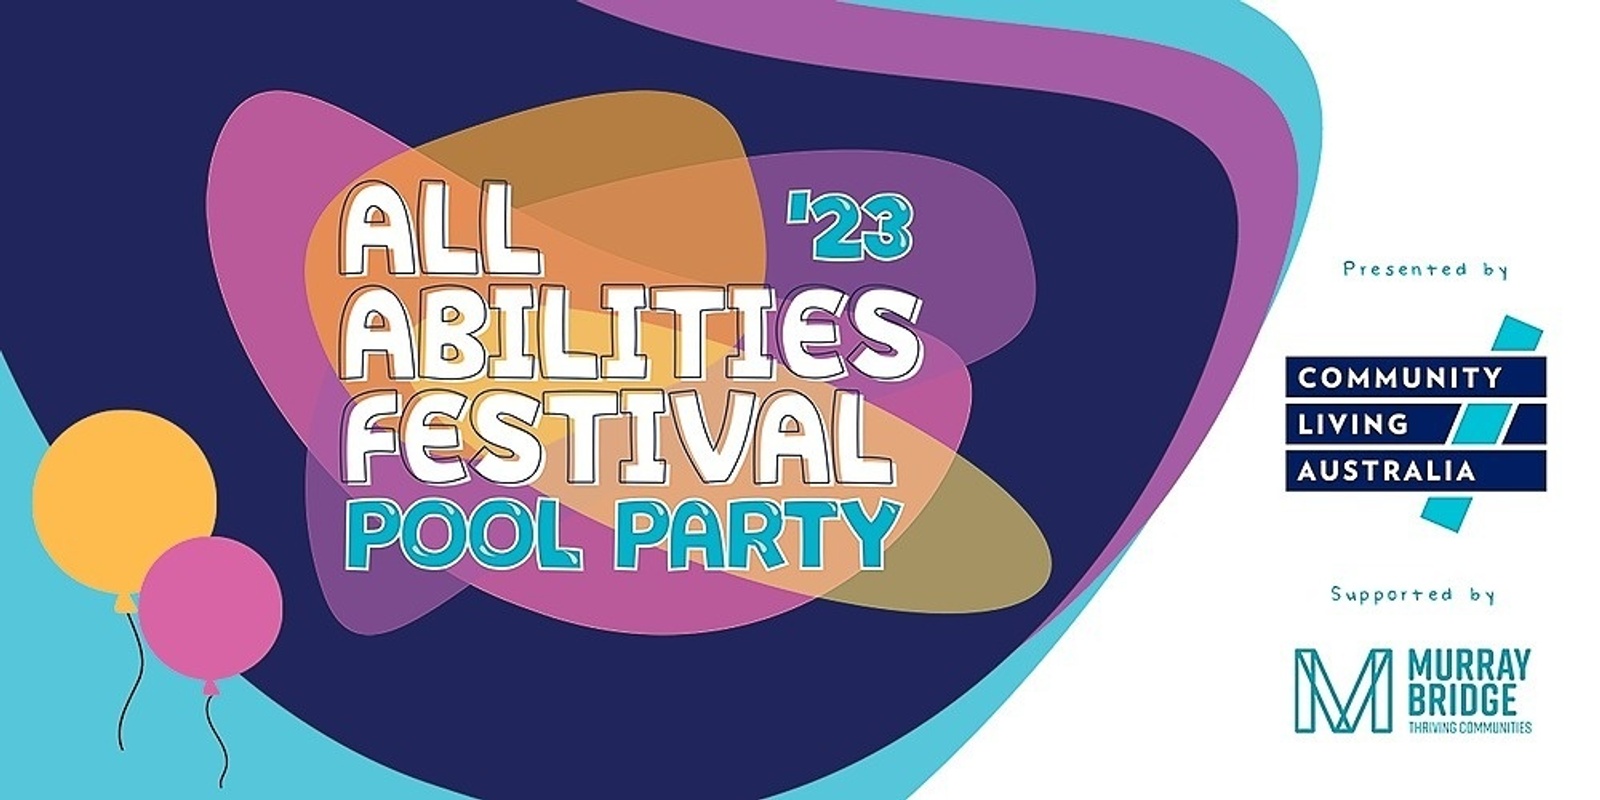 All Abilities Festival Pool Party